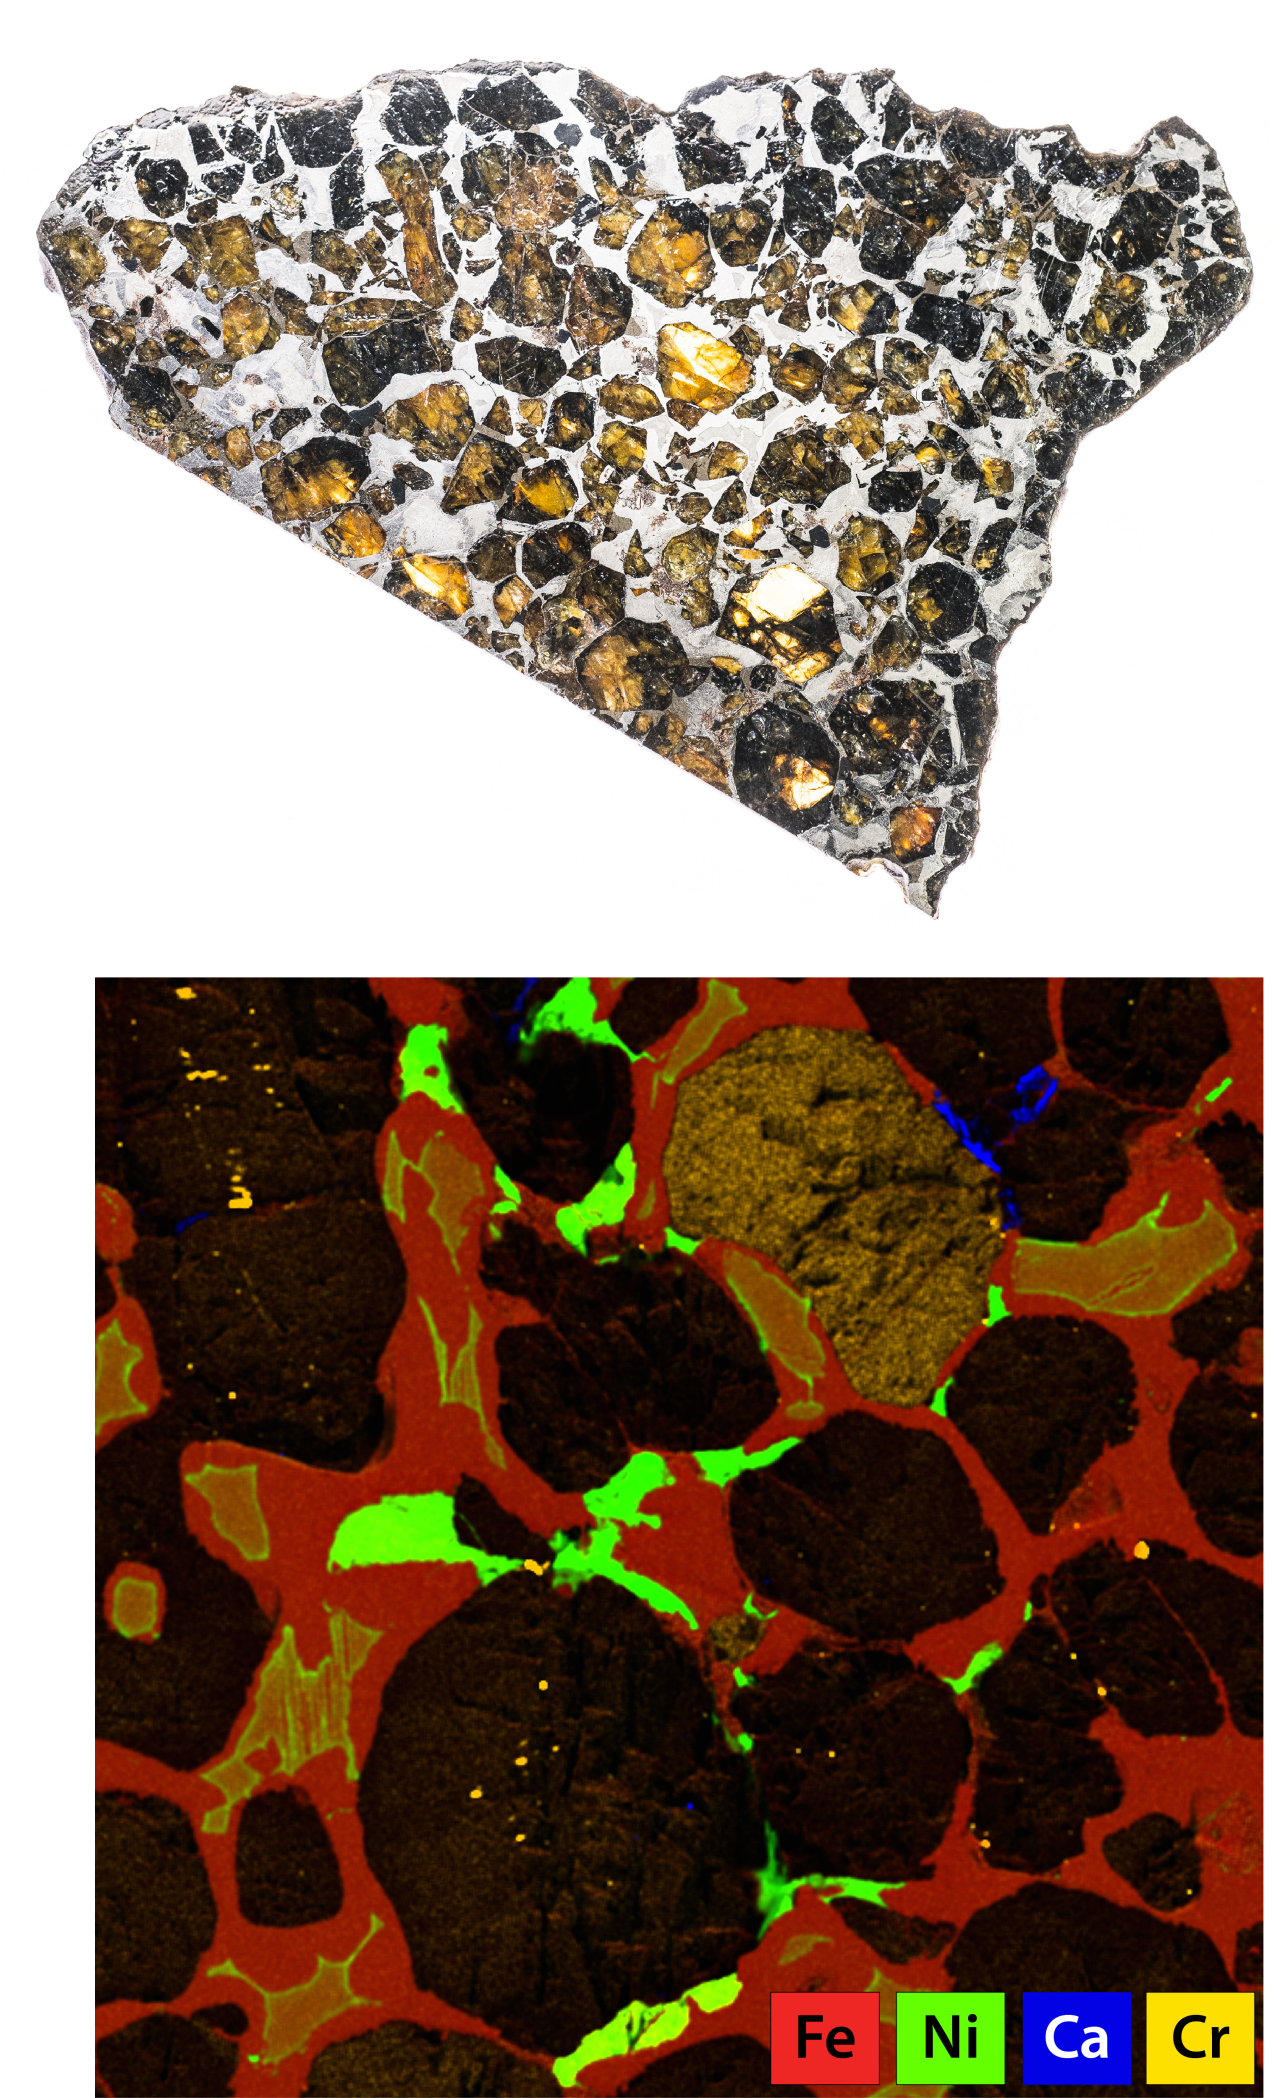 Polished surface of a pallasite